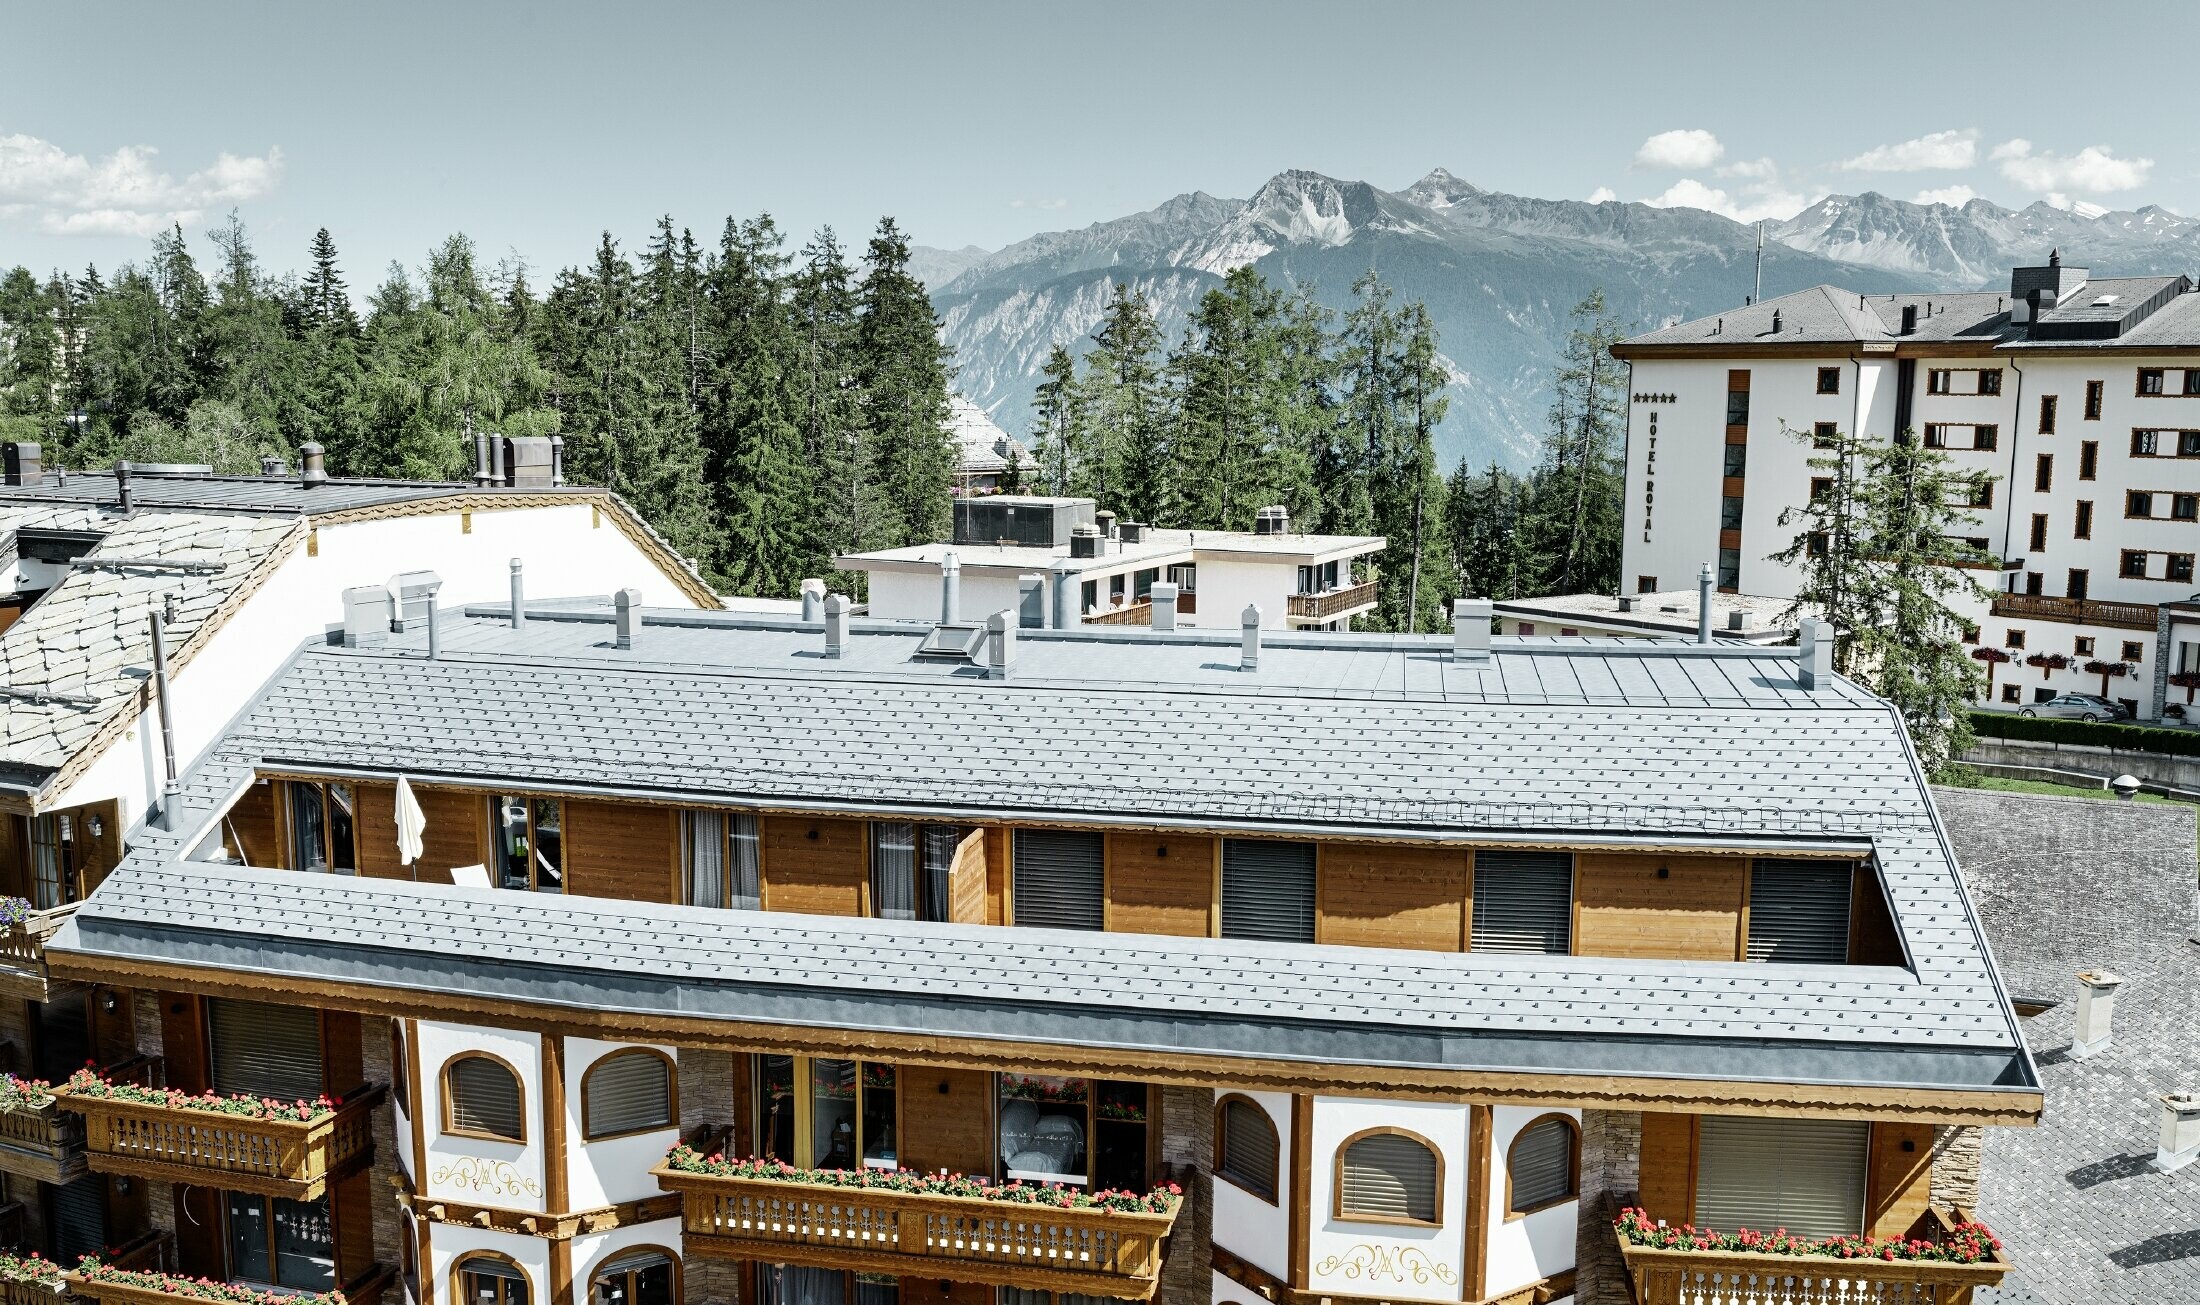 Apartment building in Crans-Montana (Switzerland) with mountains in the background, a façade with lovely wooden elements and a PREFA aluminium shingle roof in stone grey